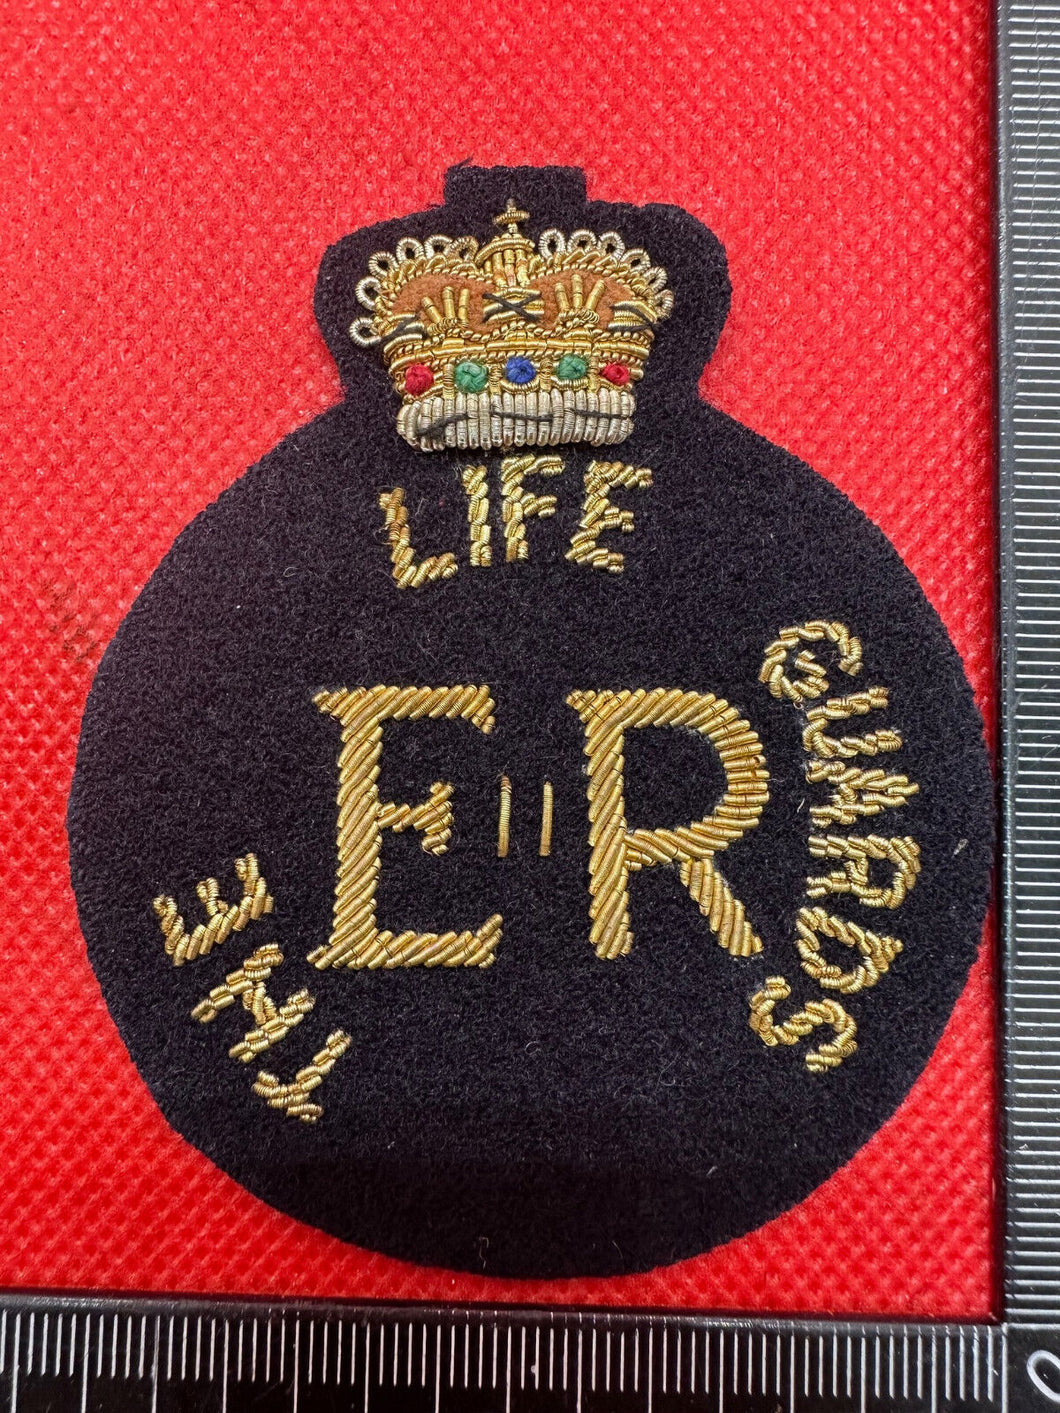 British Army Bullion Embroidered Blazer Badge - The Life Guards - Queen's Crown